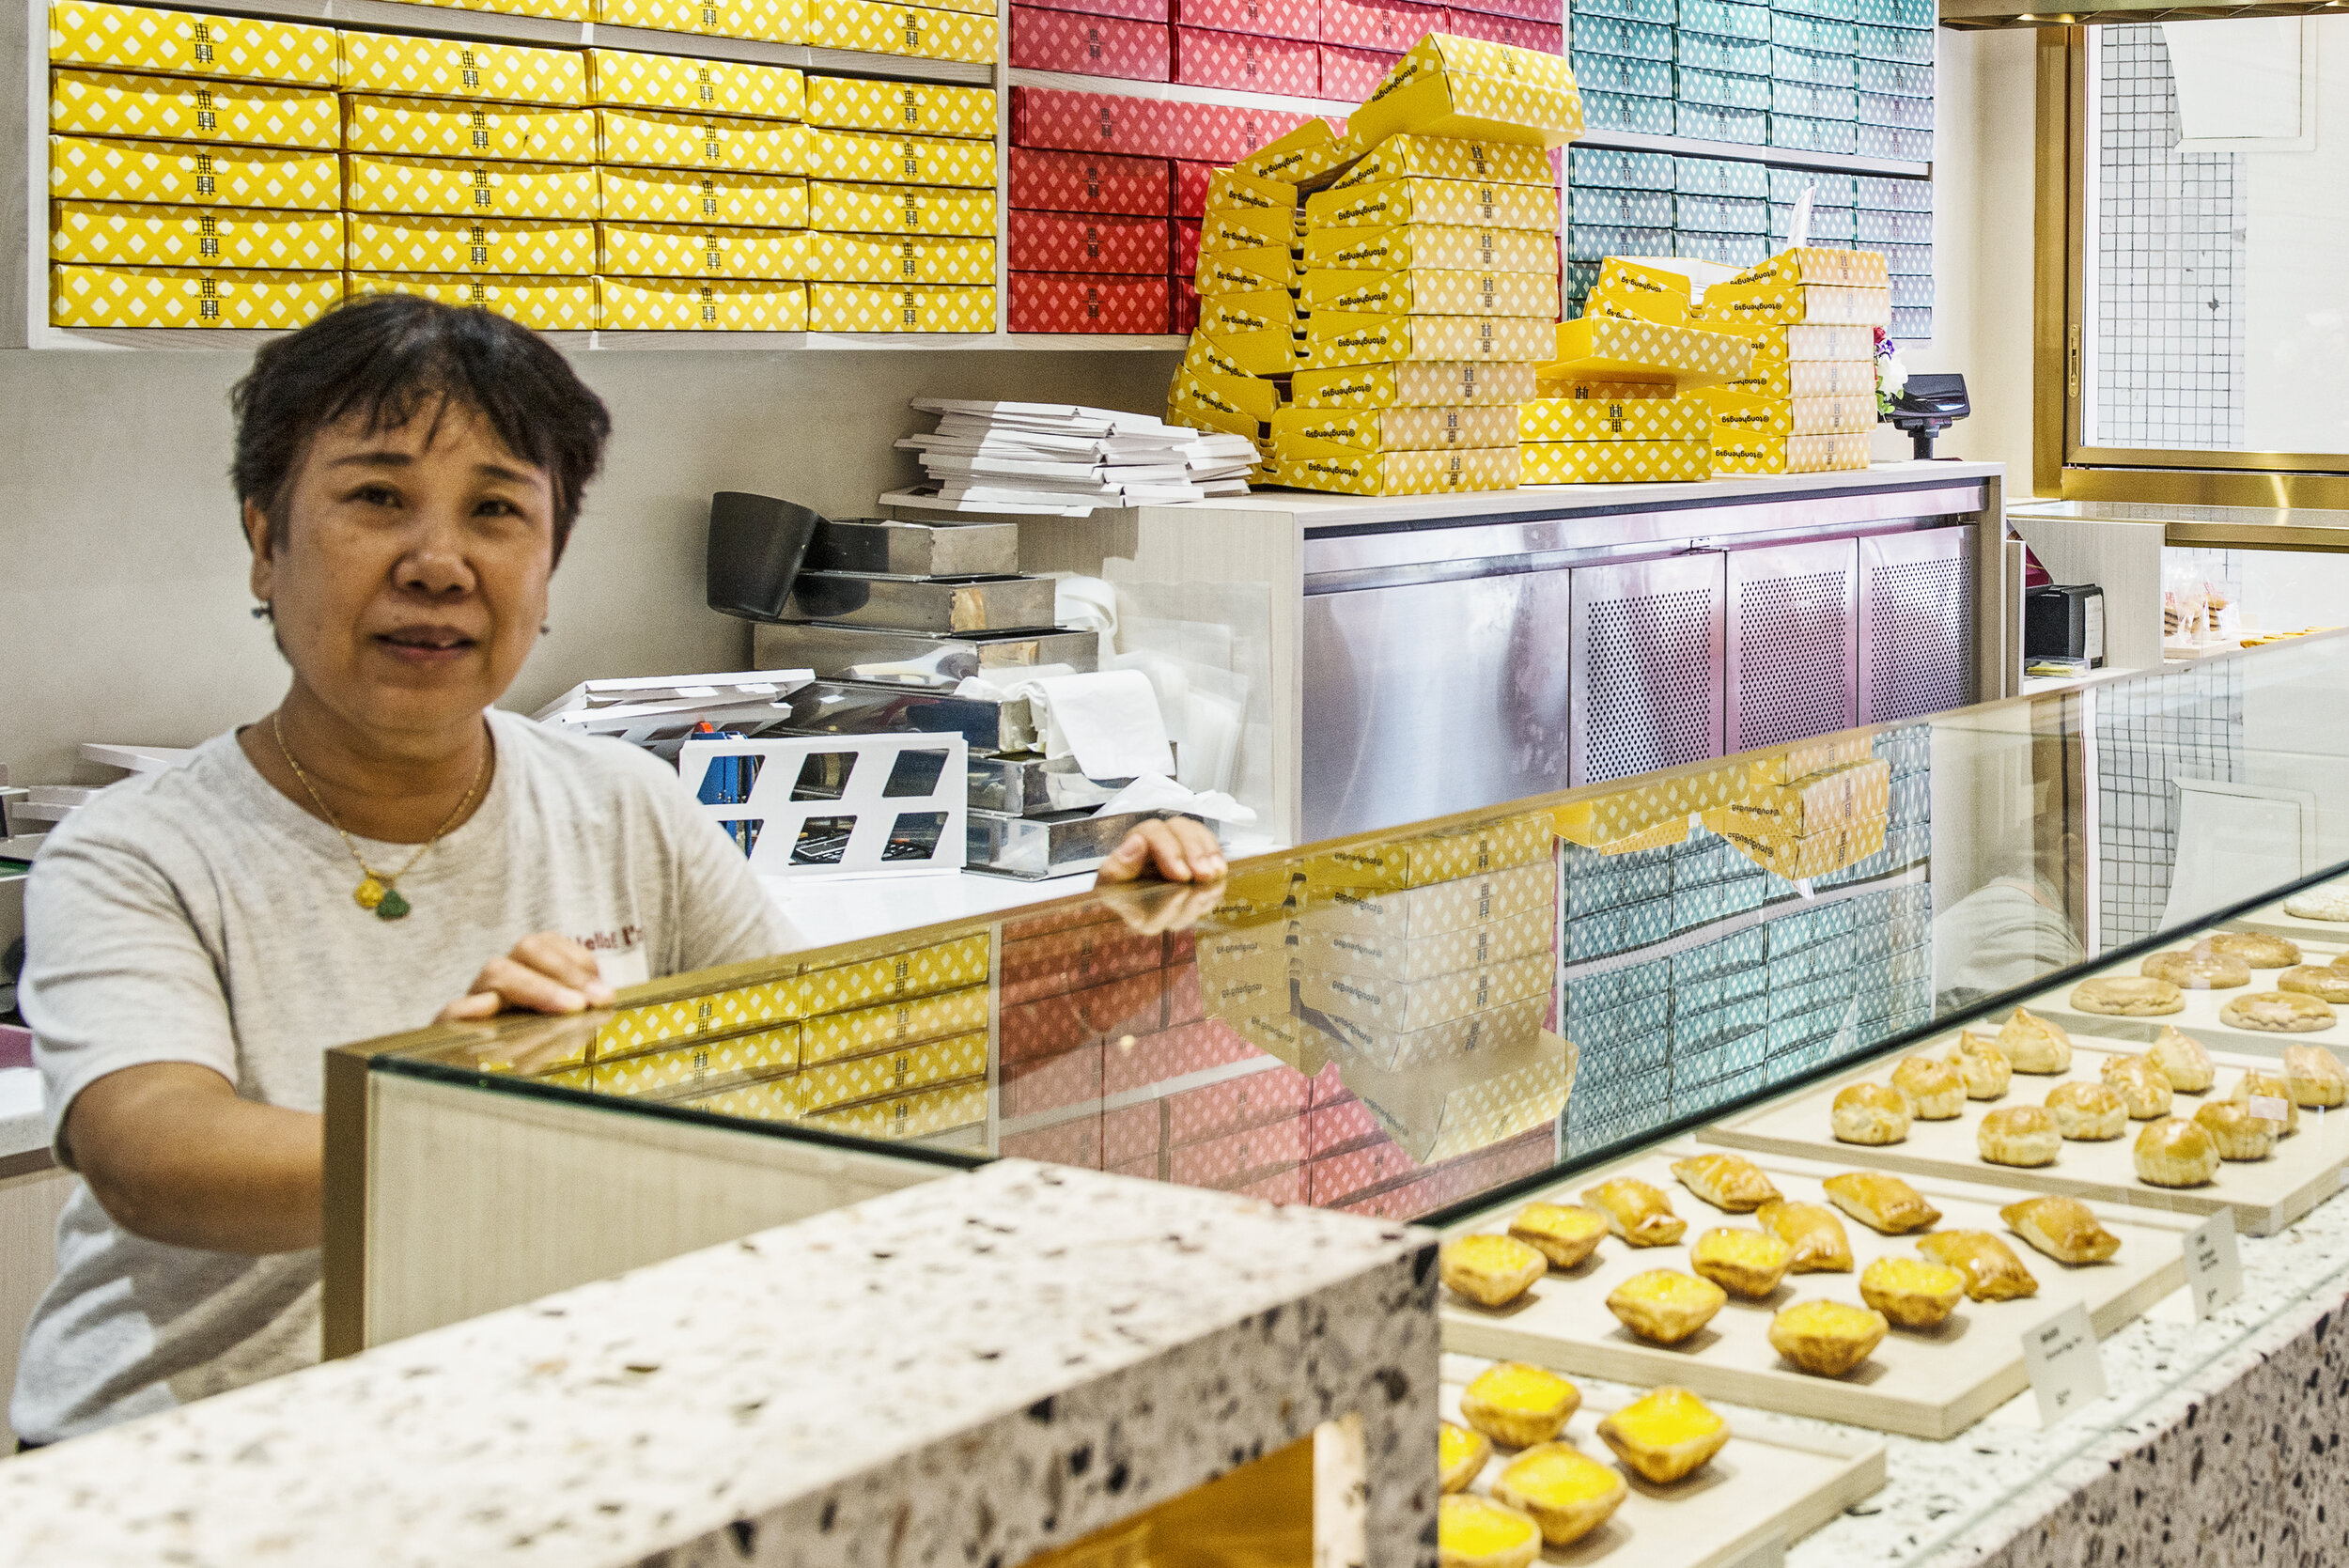  An employee poses for a photograph at traditional Cantonese confectionery Tong Heng in Singapore April 21, 2018. 